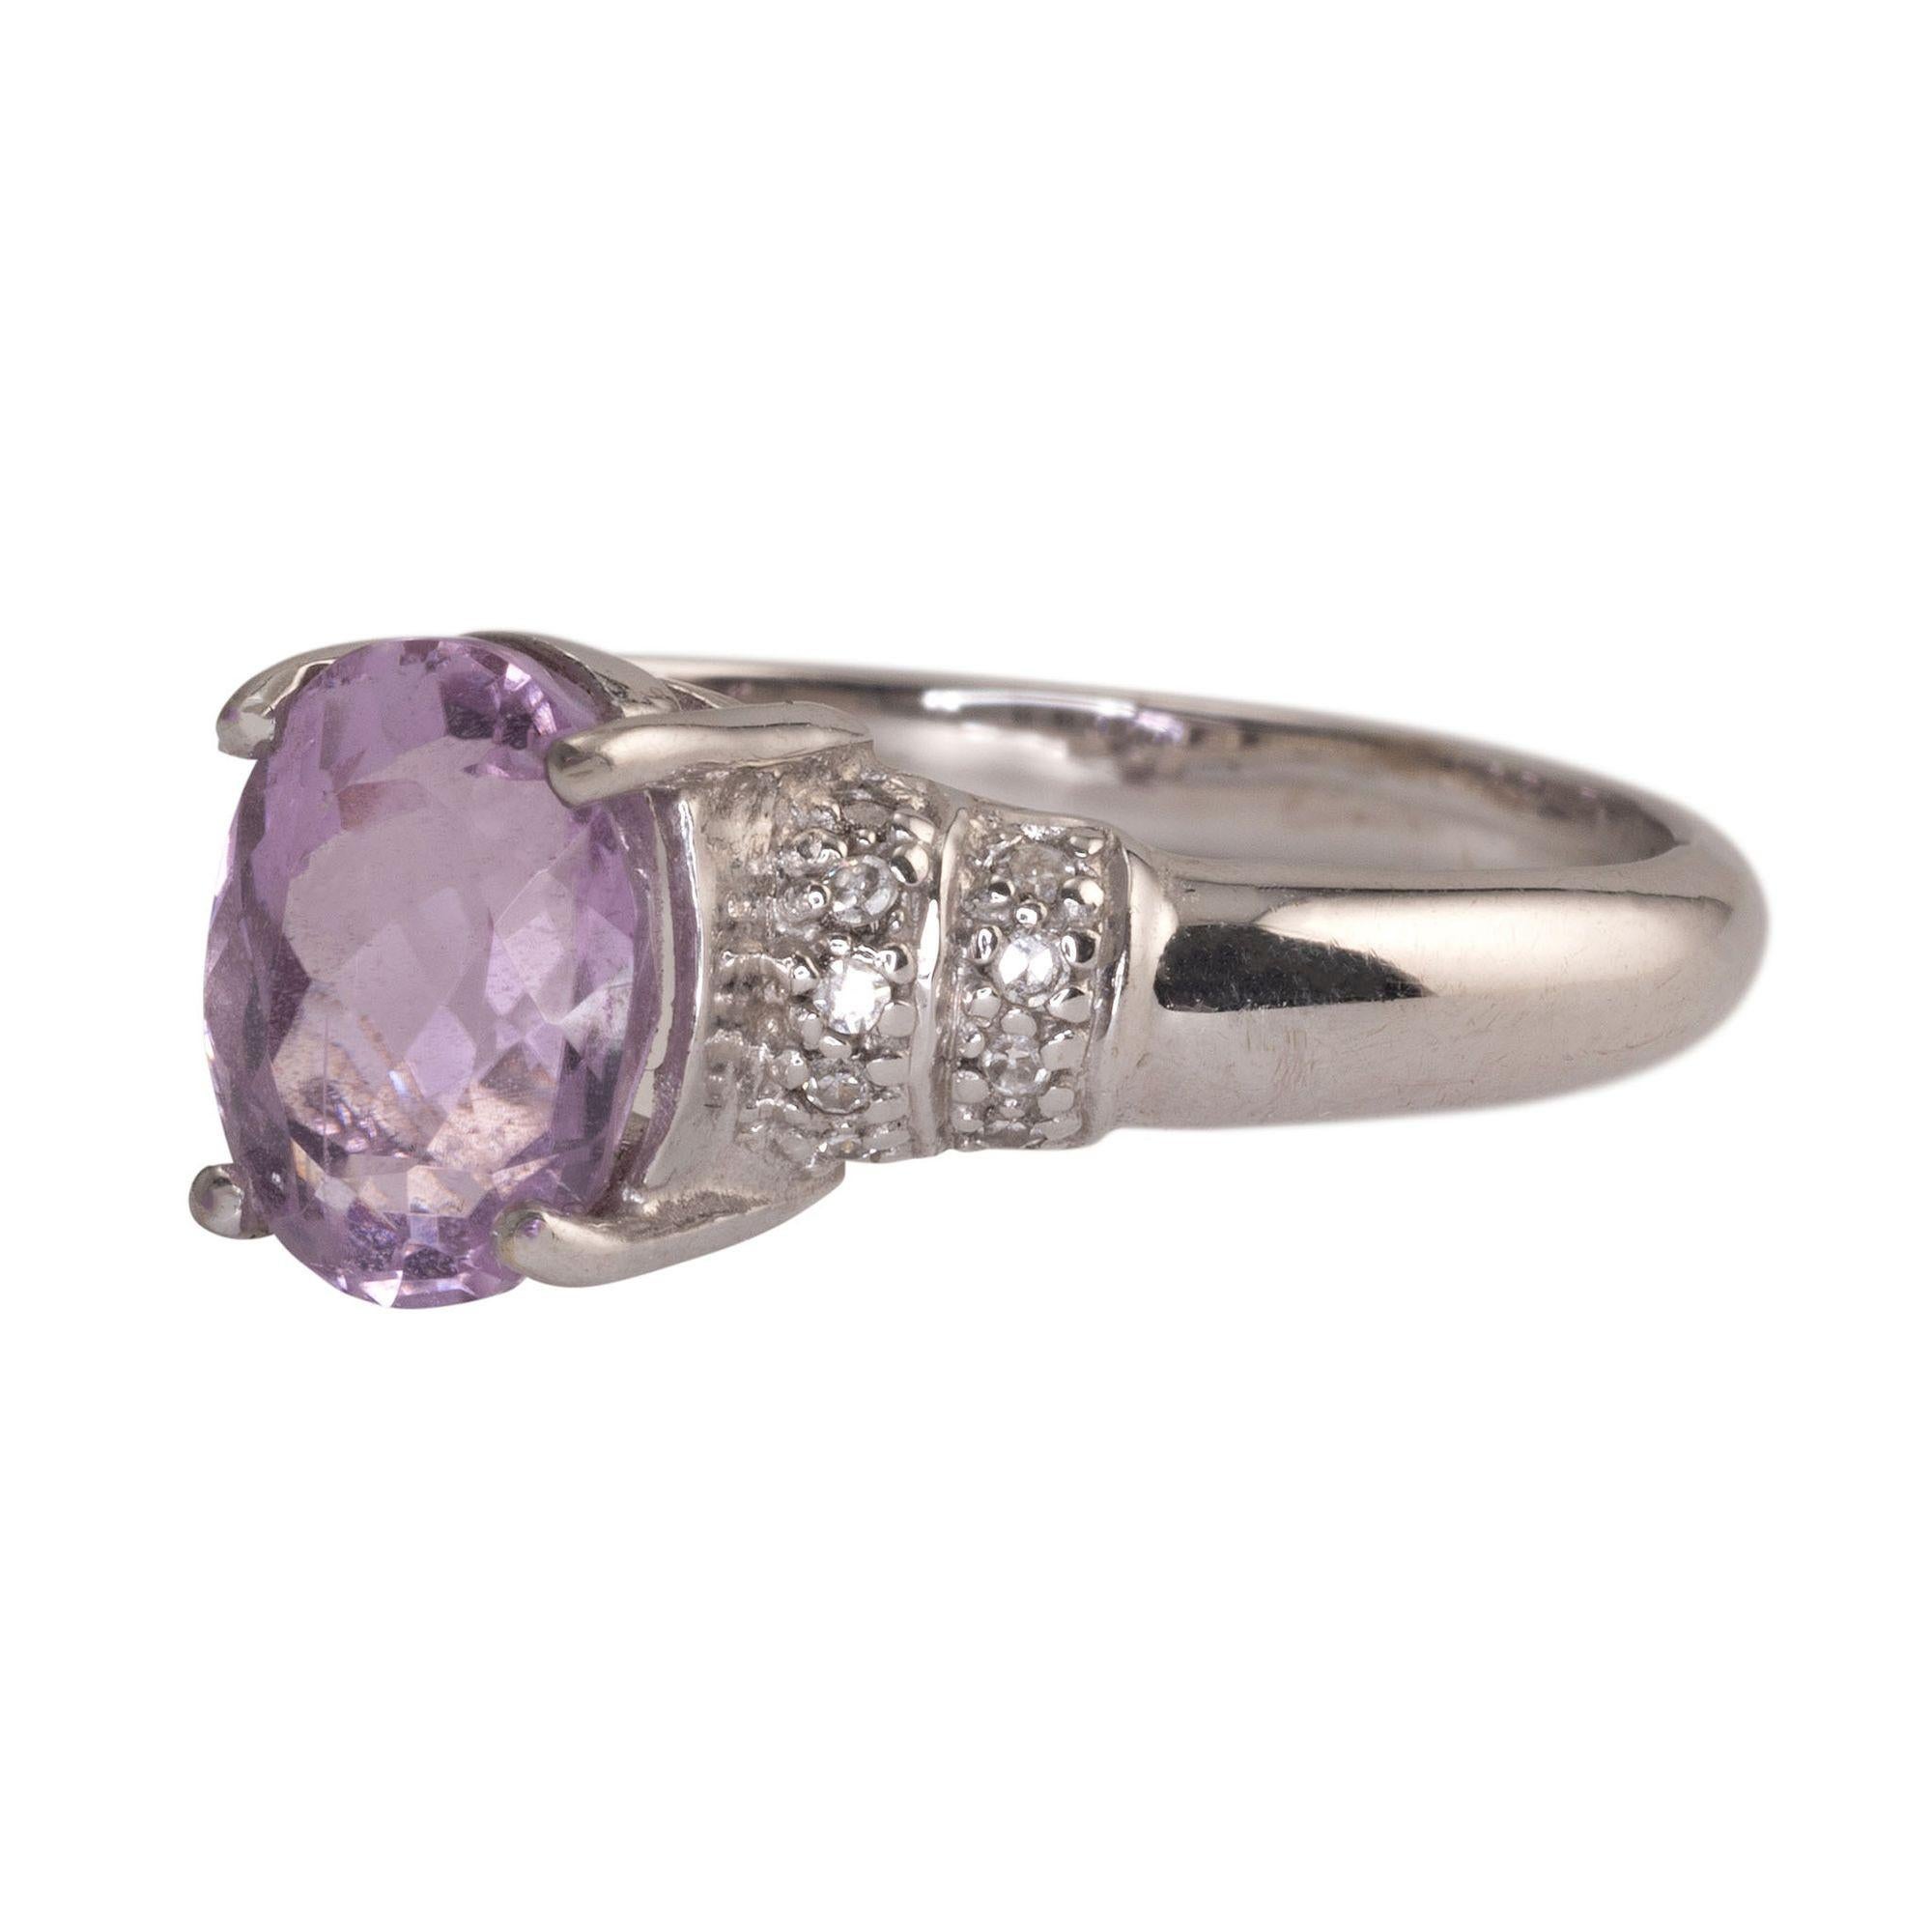 Estate kunzite & diamond 18K white gold ring. This 18 karat white gold ring features a 1.89 carat oval kunzite center stone with .066 carat total weight of accent diamonds. The kunzite ring is a size 6.75. [RHAW 39]

*Resizing available for